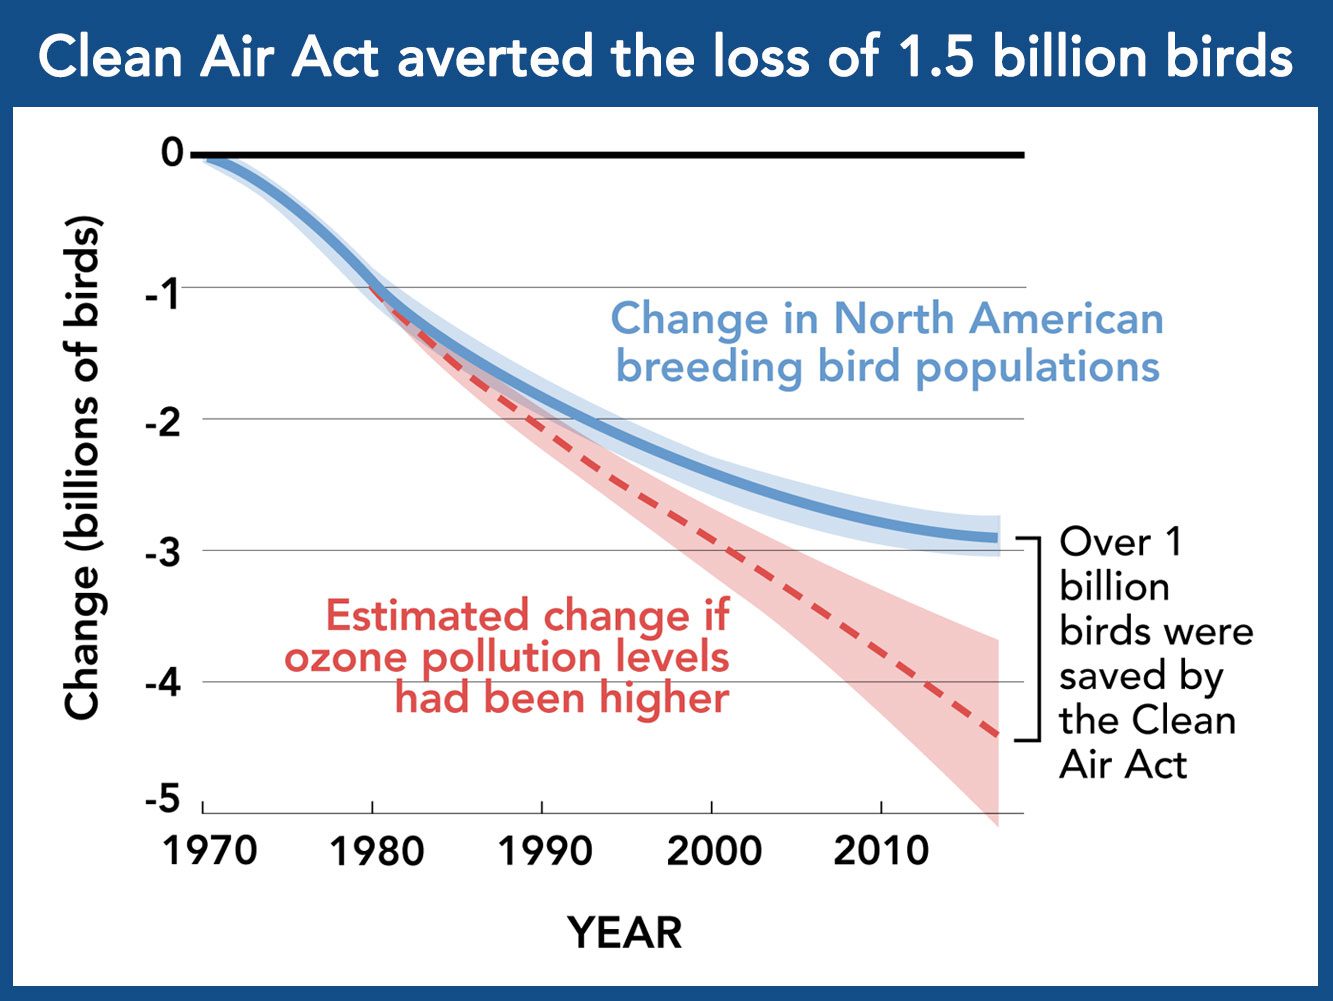 A study by scientists and economists from Cornell University and the University of Oregon found that improved air quality under the Clean Air Act averted the loss of 1.5 billion birds. Source: Conservation cobenefits from air pollution regulation: Evidence from birds, PNAS, Dec. 8, 2020.